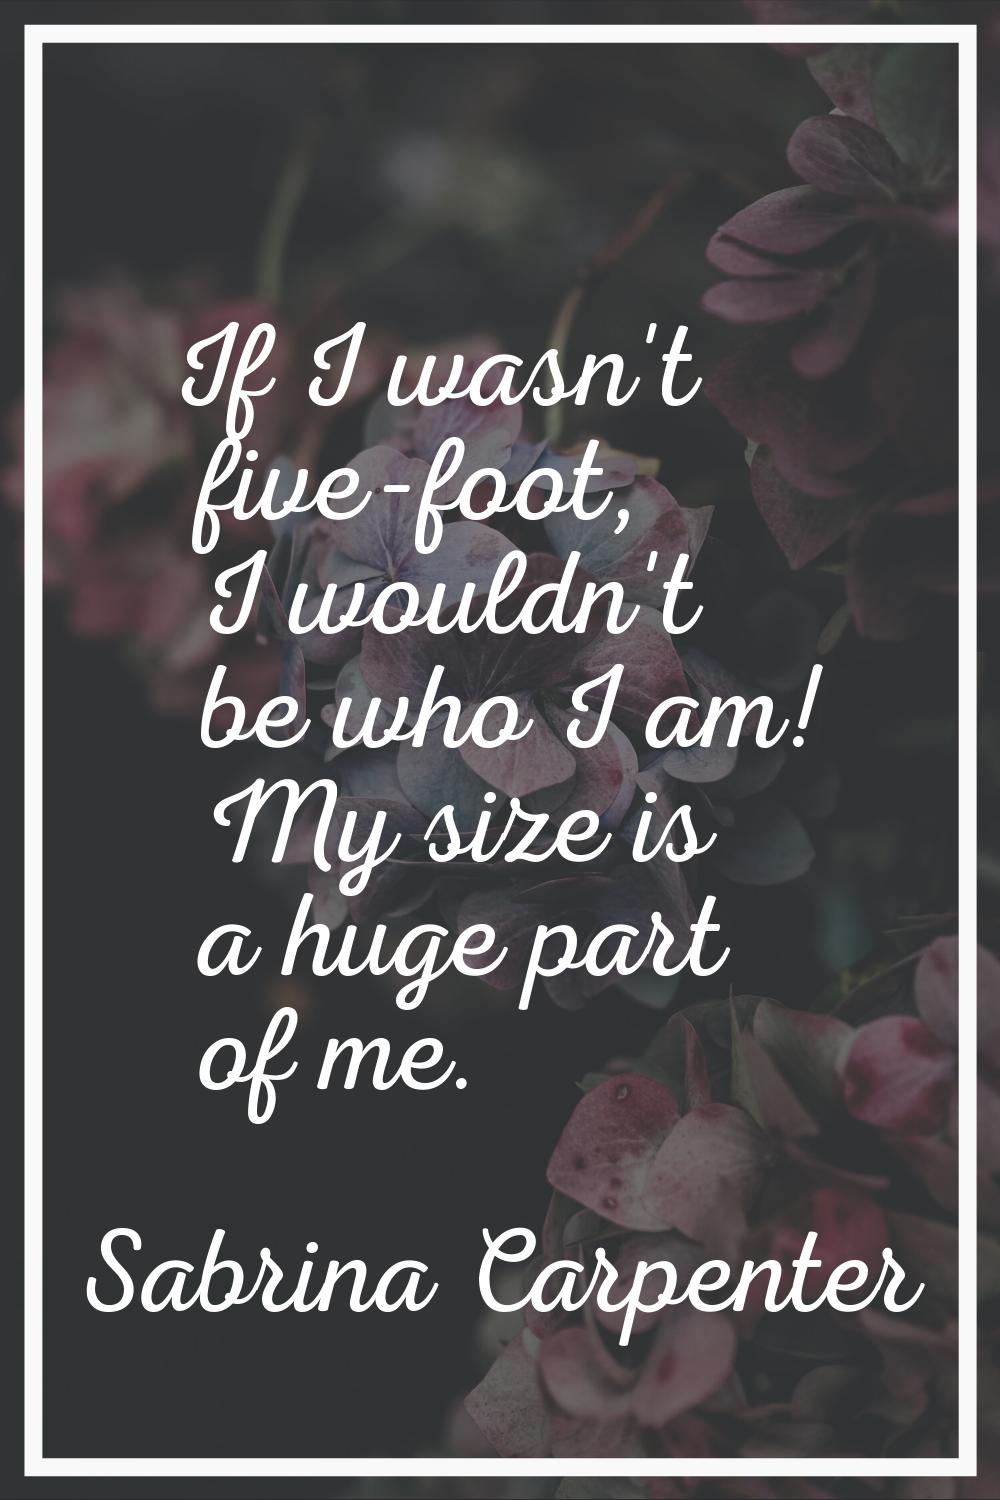 If I wasn't five-foot, I wouldn't be who I am! My size is a huge part of me.